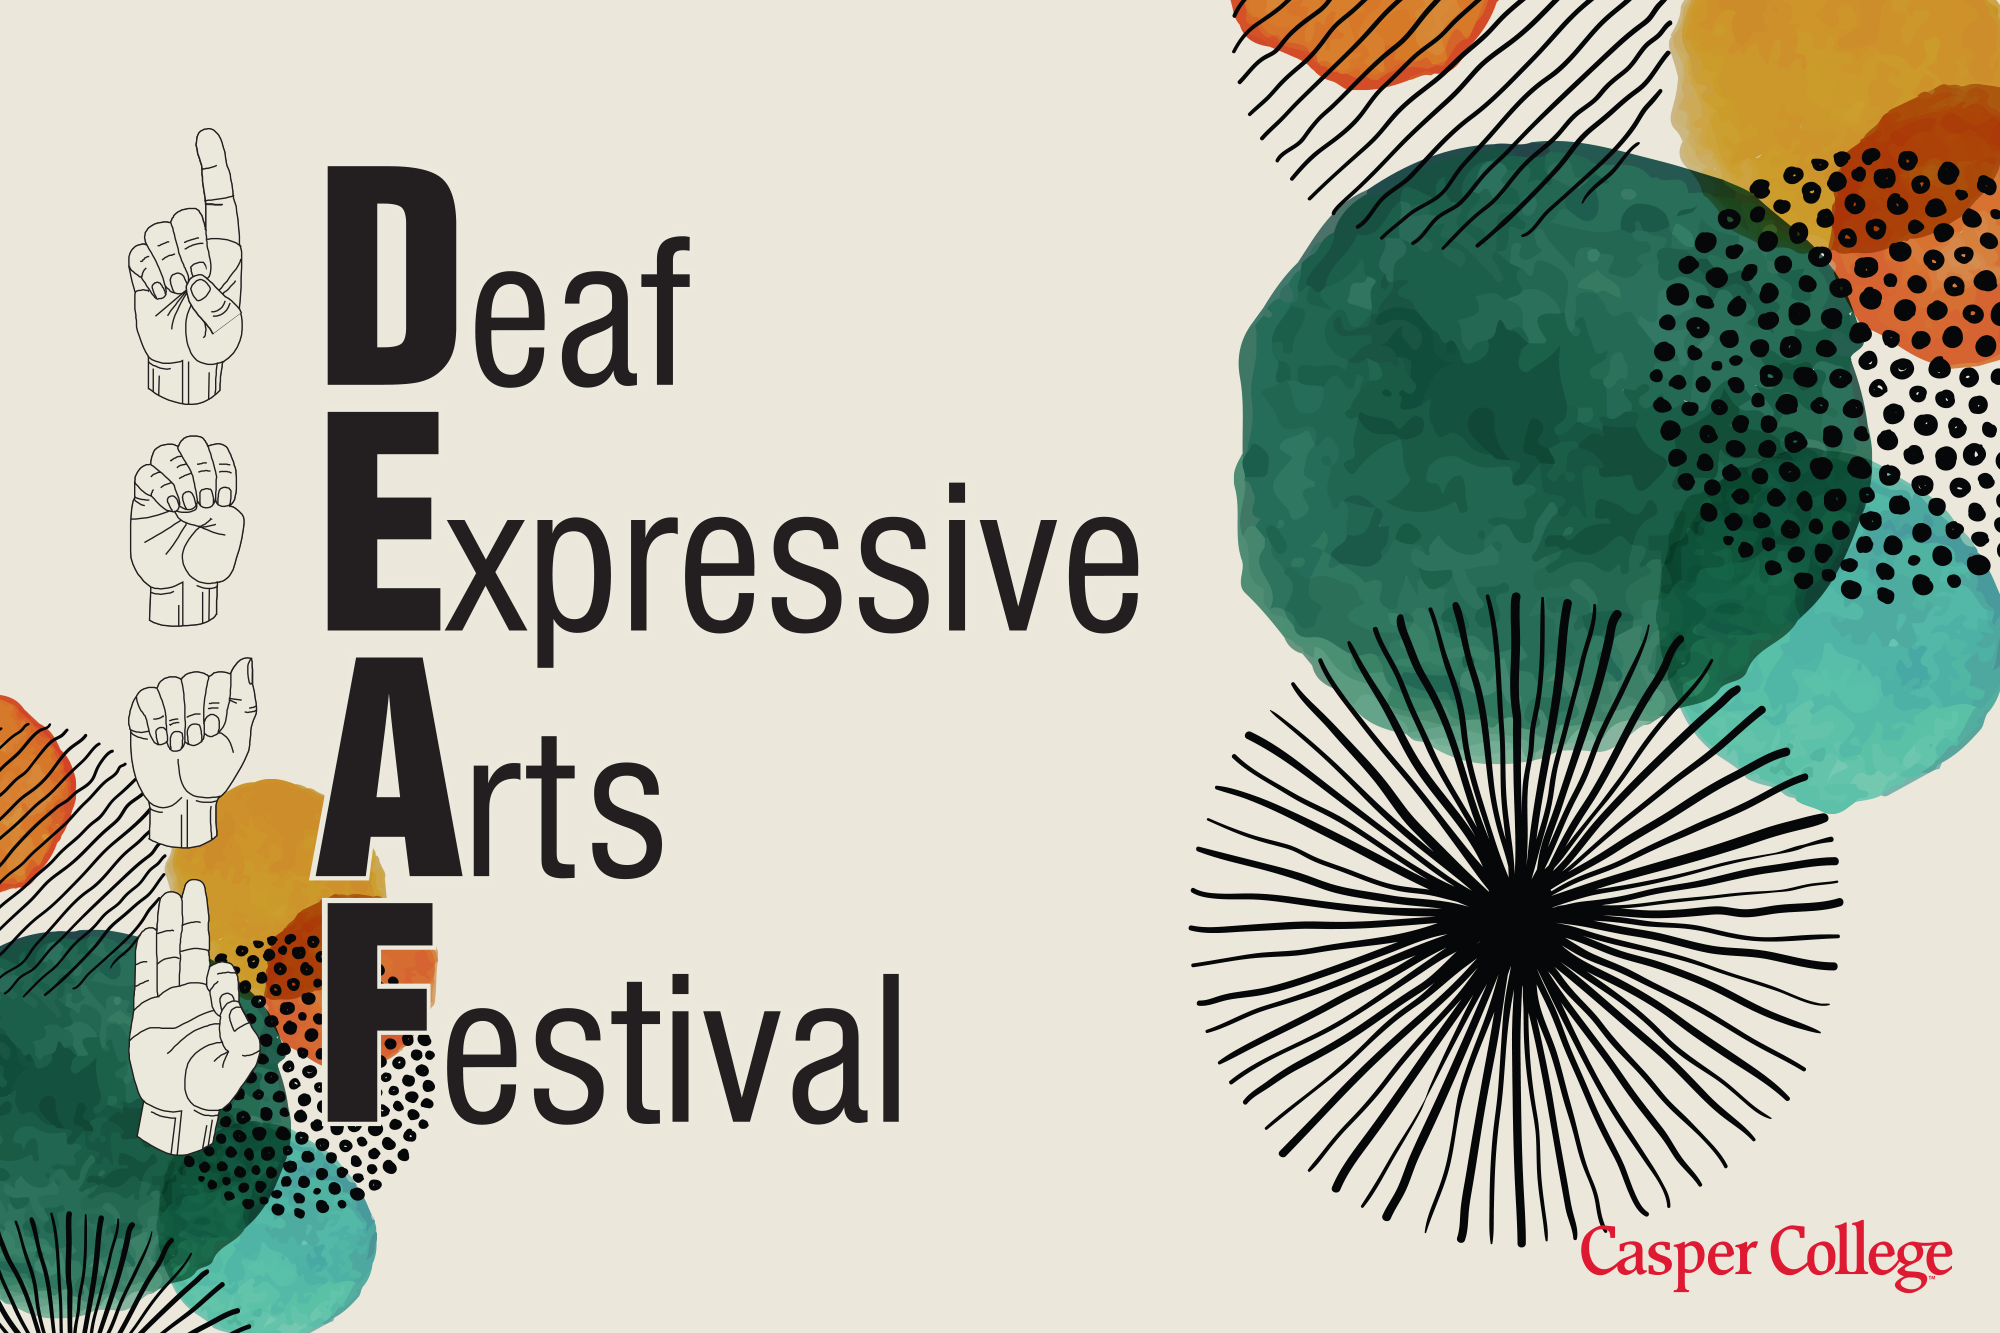 Image for Fifth Annual Deaf Expressive Arts Festival.